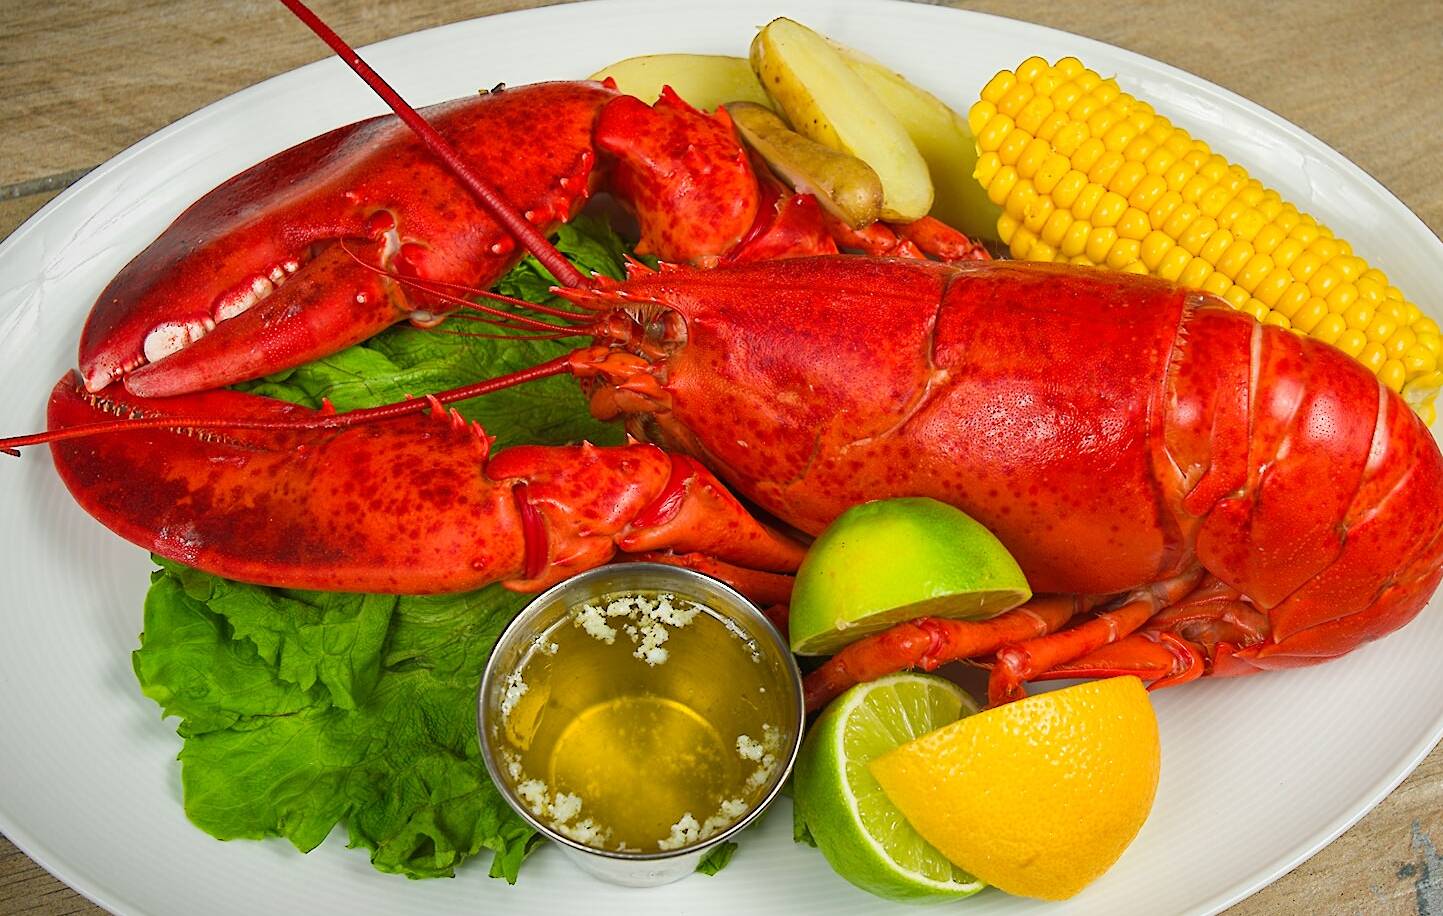 Whole Lobster served with a side of corn on the cob and fingerling potatoes, melted butter and lemon wedges